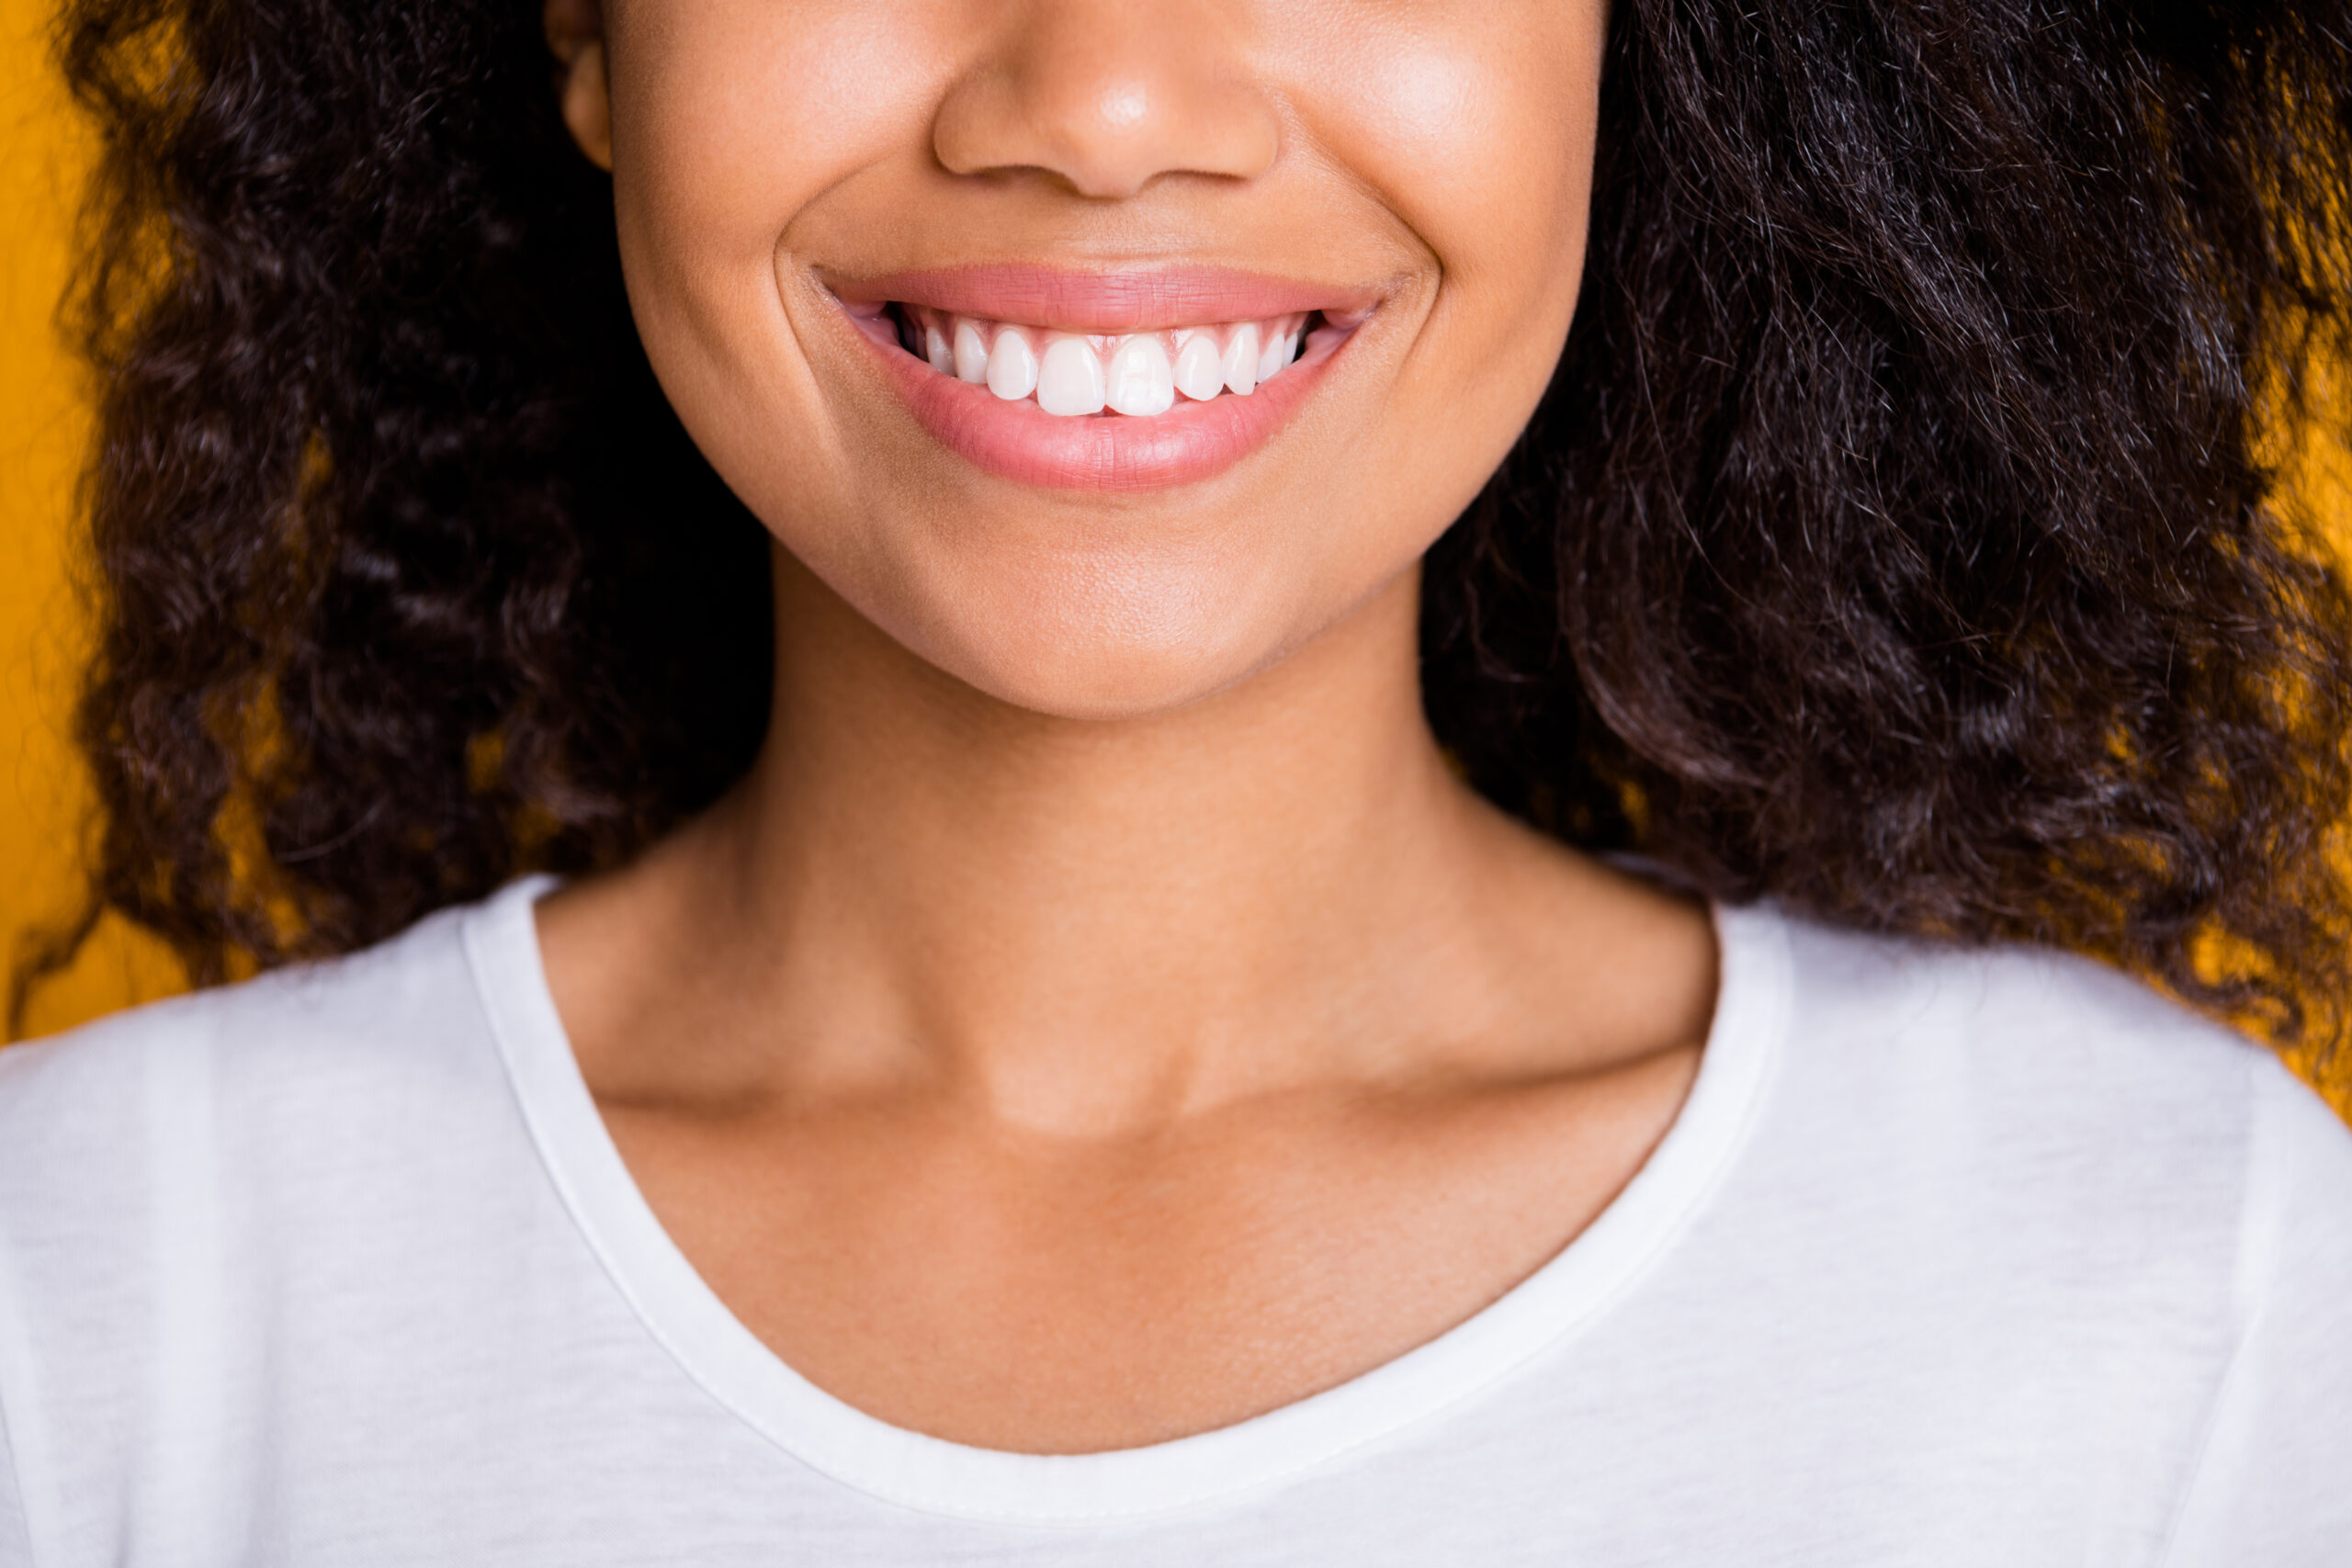 Dental Implants: Why They Are the Ideal Choice for Restoring Your Smile in Long Beach, CA